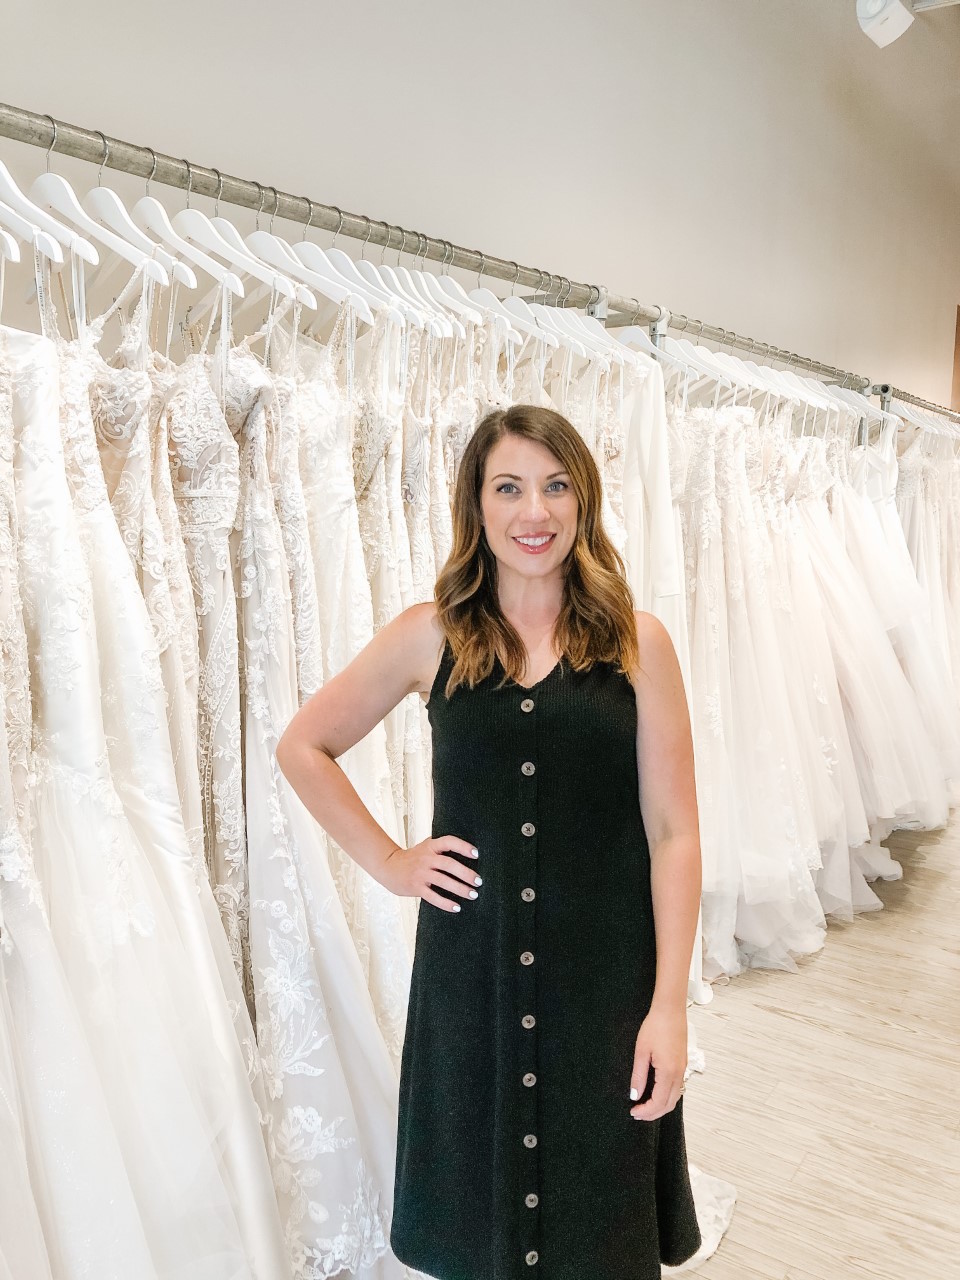 Wedding Dress Events | List Of All Upcoming Wedding Dress Events In Ottawa